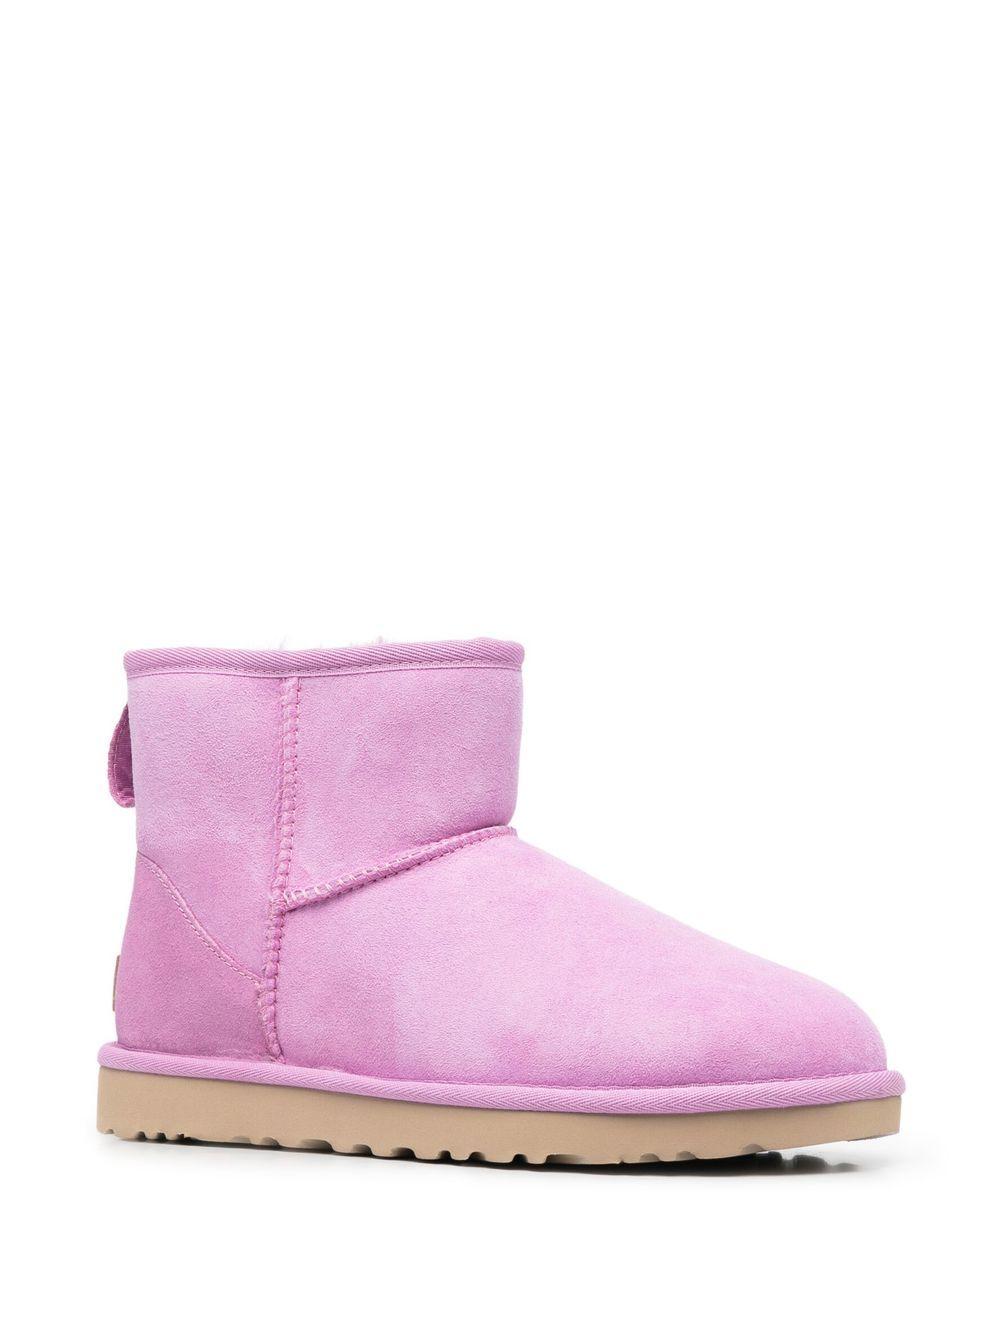 UGG Suede Classic Mini Ii Boots in Pink - Save 34% | Lyst